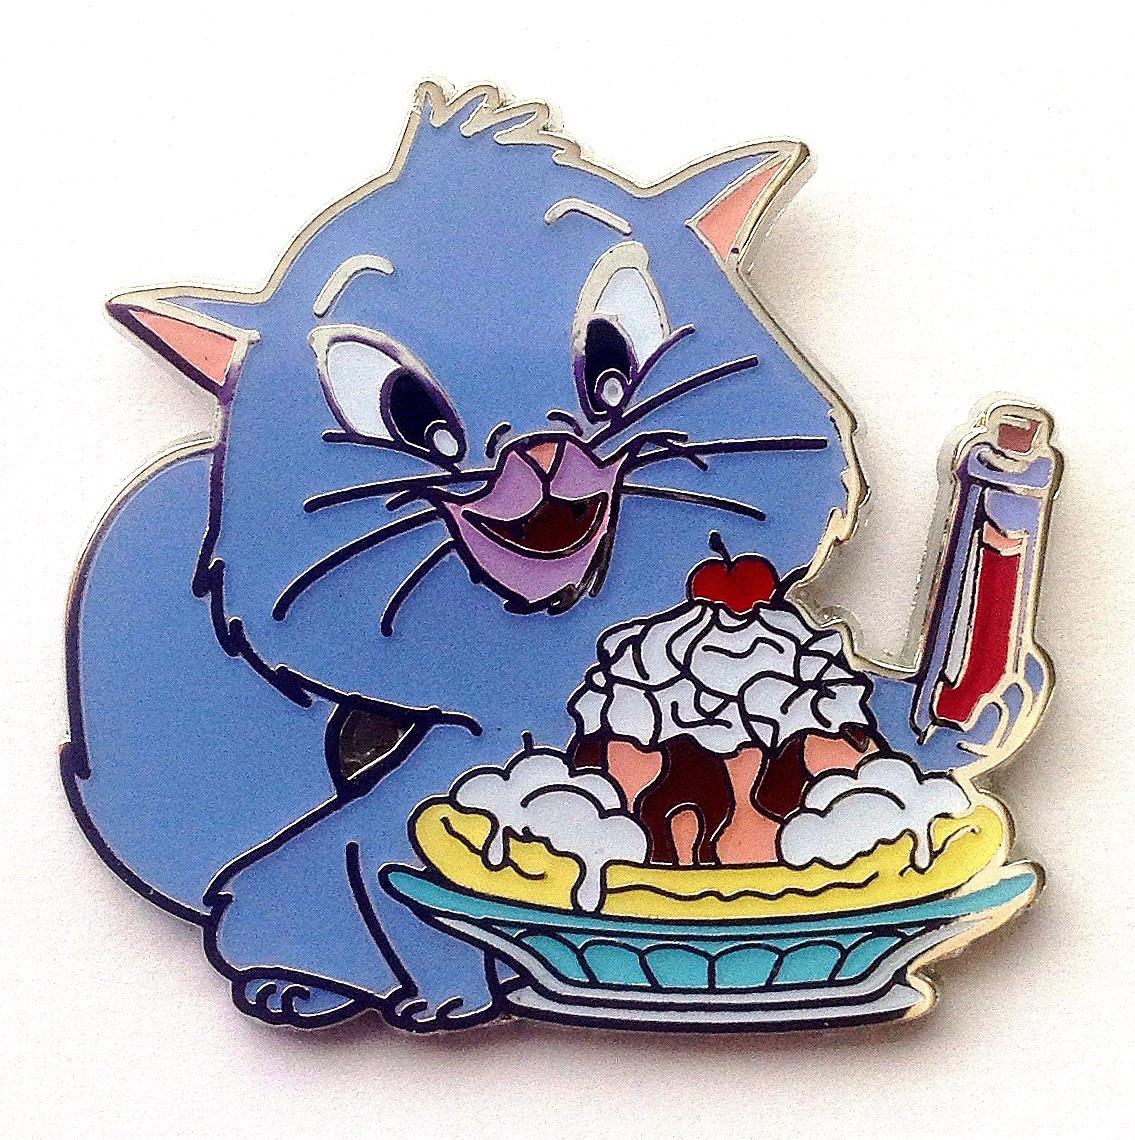 DSSH - Pin Trader's Delight - Yzma as a cat - GWP